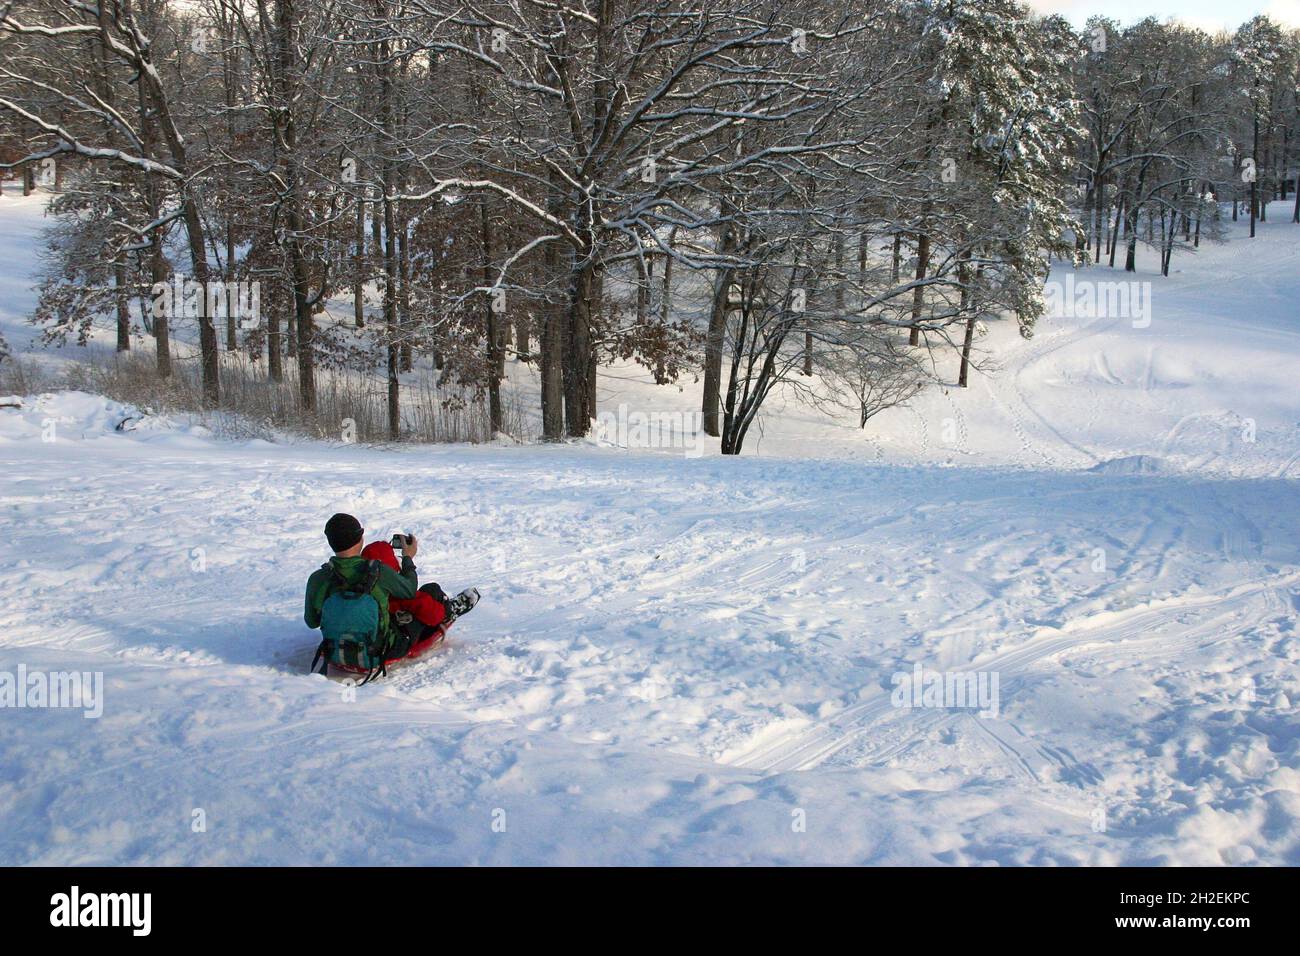 A father and child pile onto a plastic sled and take a selfie as they slide down a snowy hill in winter Stock Photo